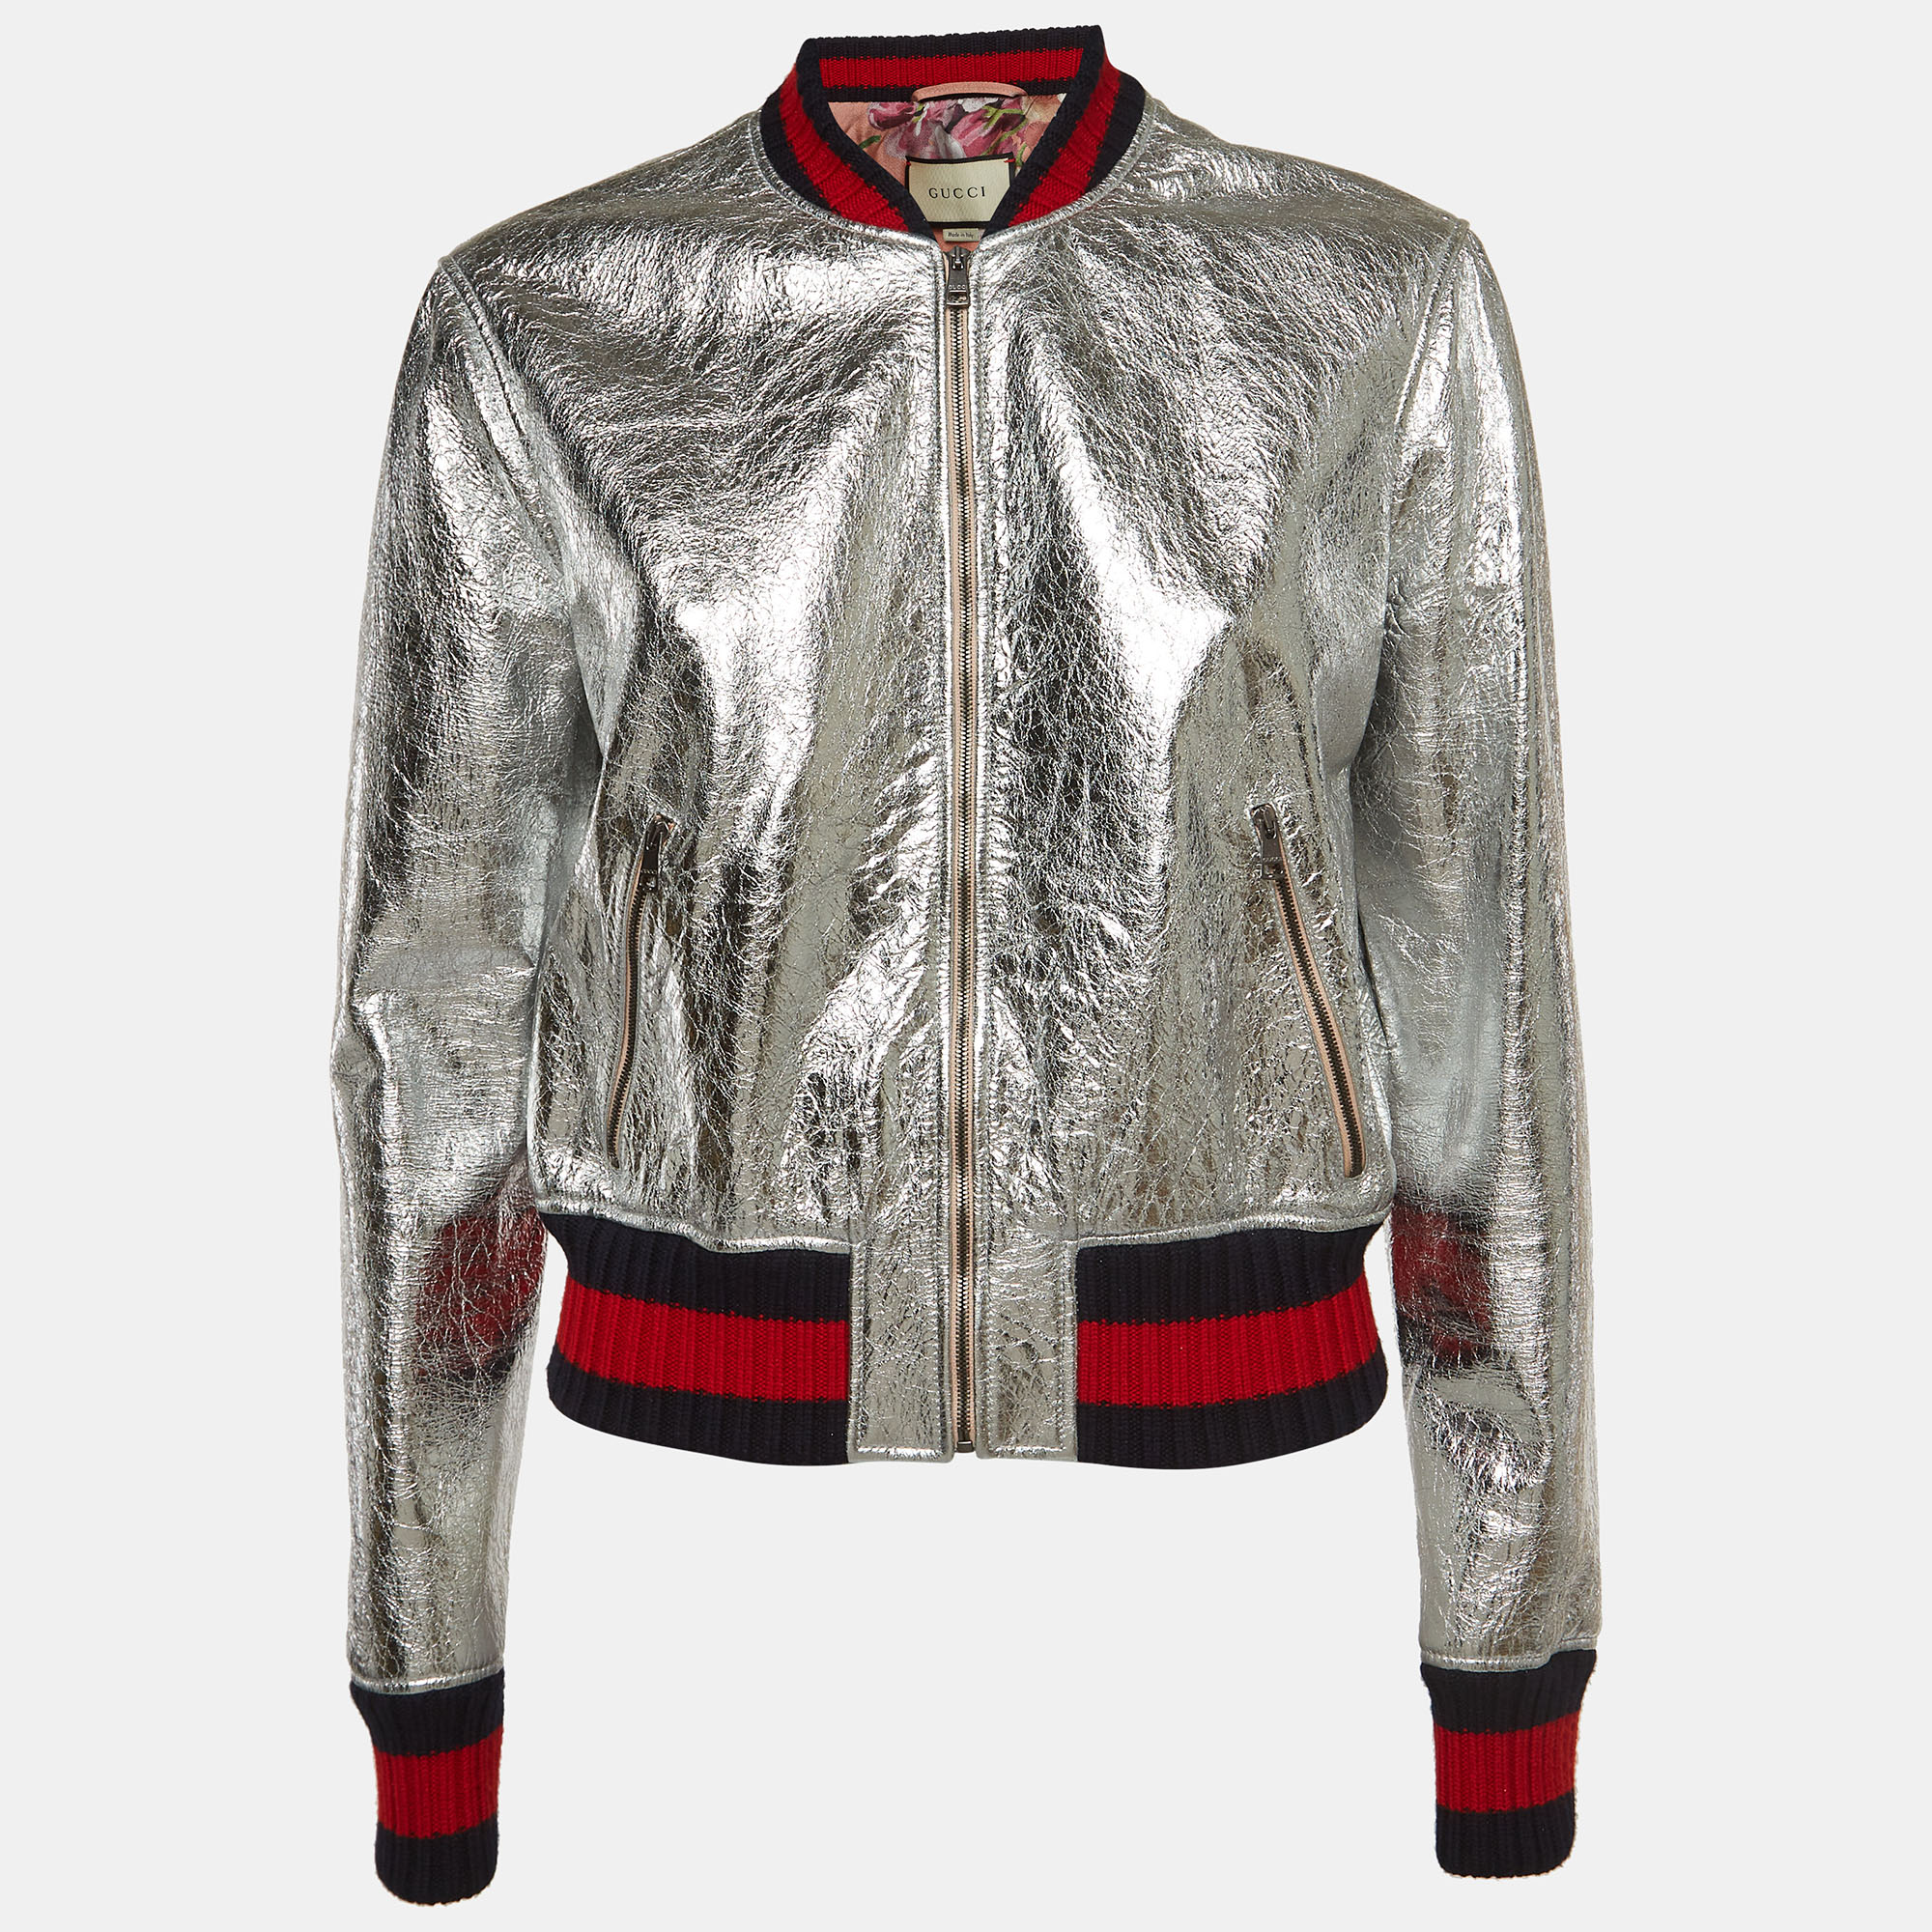 Infuse an extra dose of style into your outfit with this highly fashionable jacket from Gucci. Tailored from quality materials it embodies a contemporary vibe and is filled with functional characteristics.